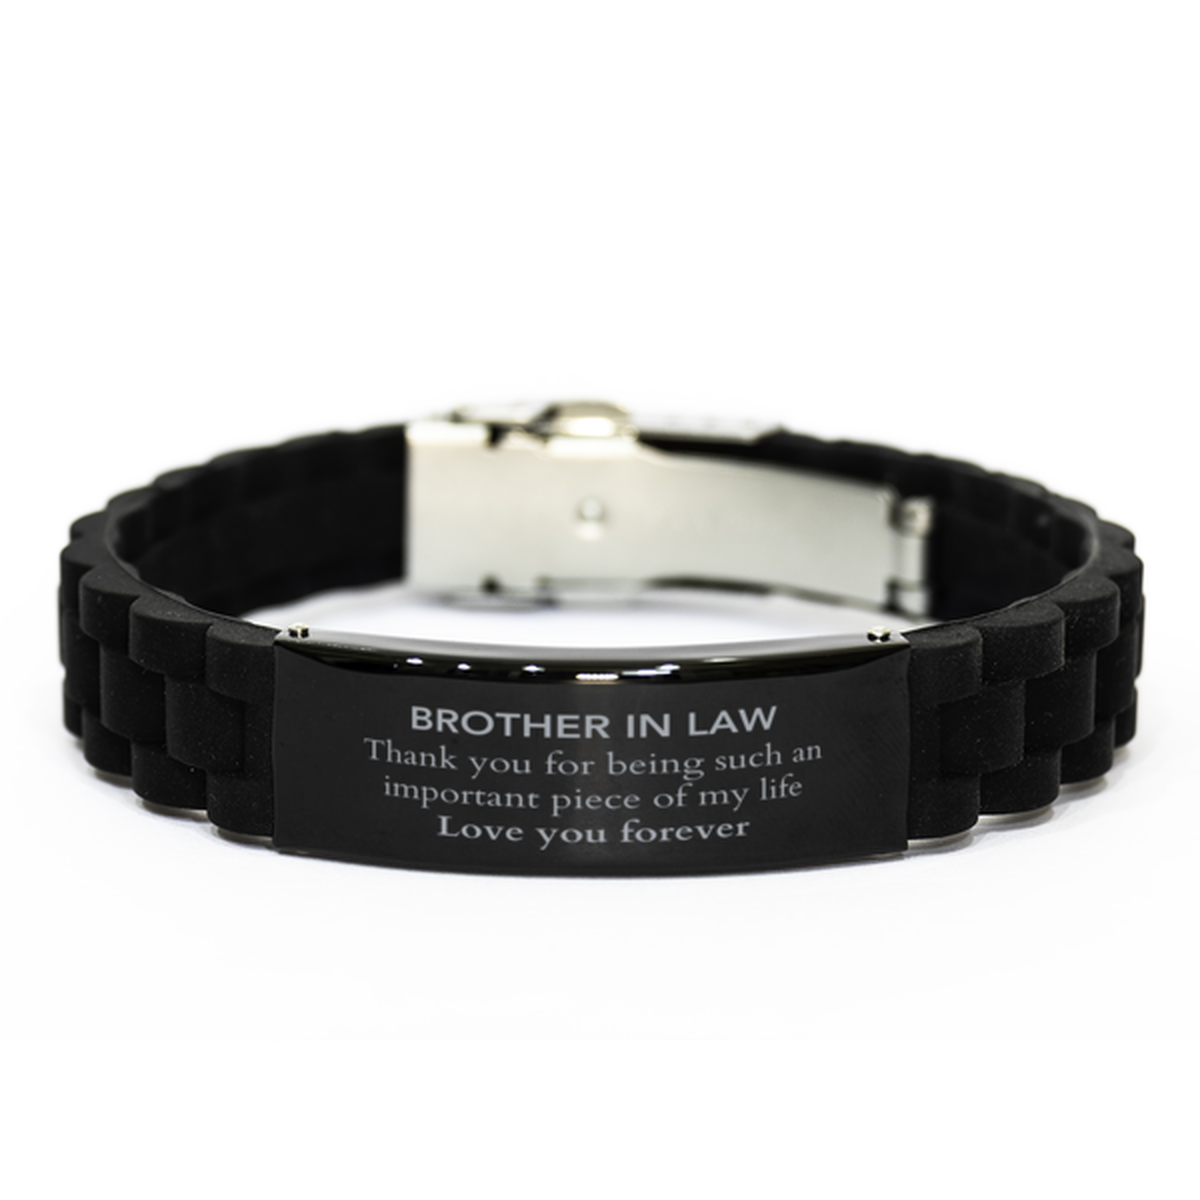 Appropriate Brother In Law Black Glidelock Clasp Bracelet Epic Birthday Gifts for Brother In Law Thank you for being such an important piece of my life Brother In Law Christmas Mothers Fathers Day